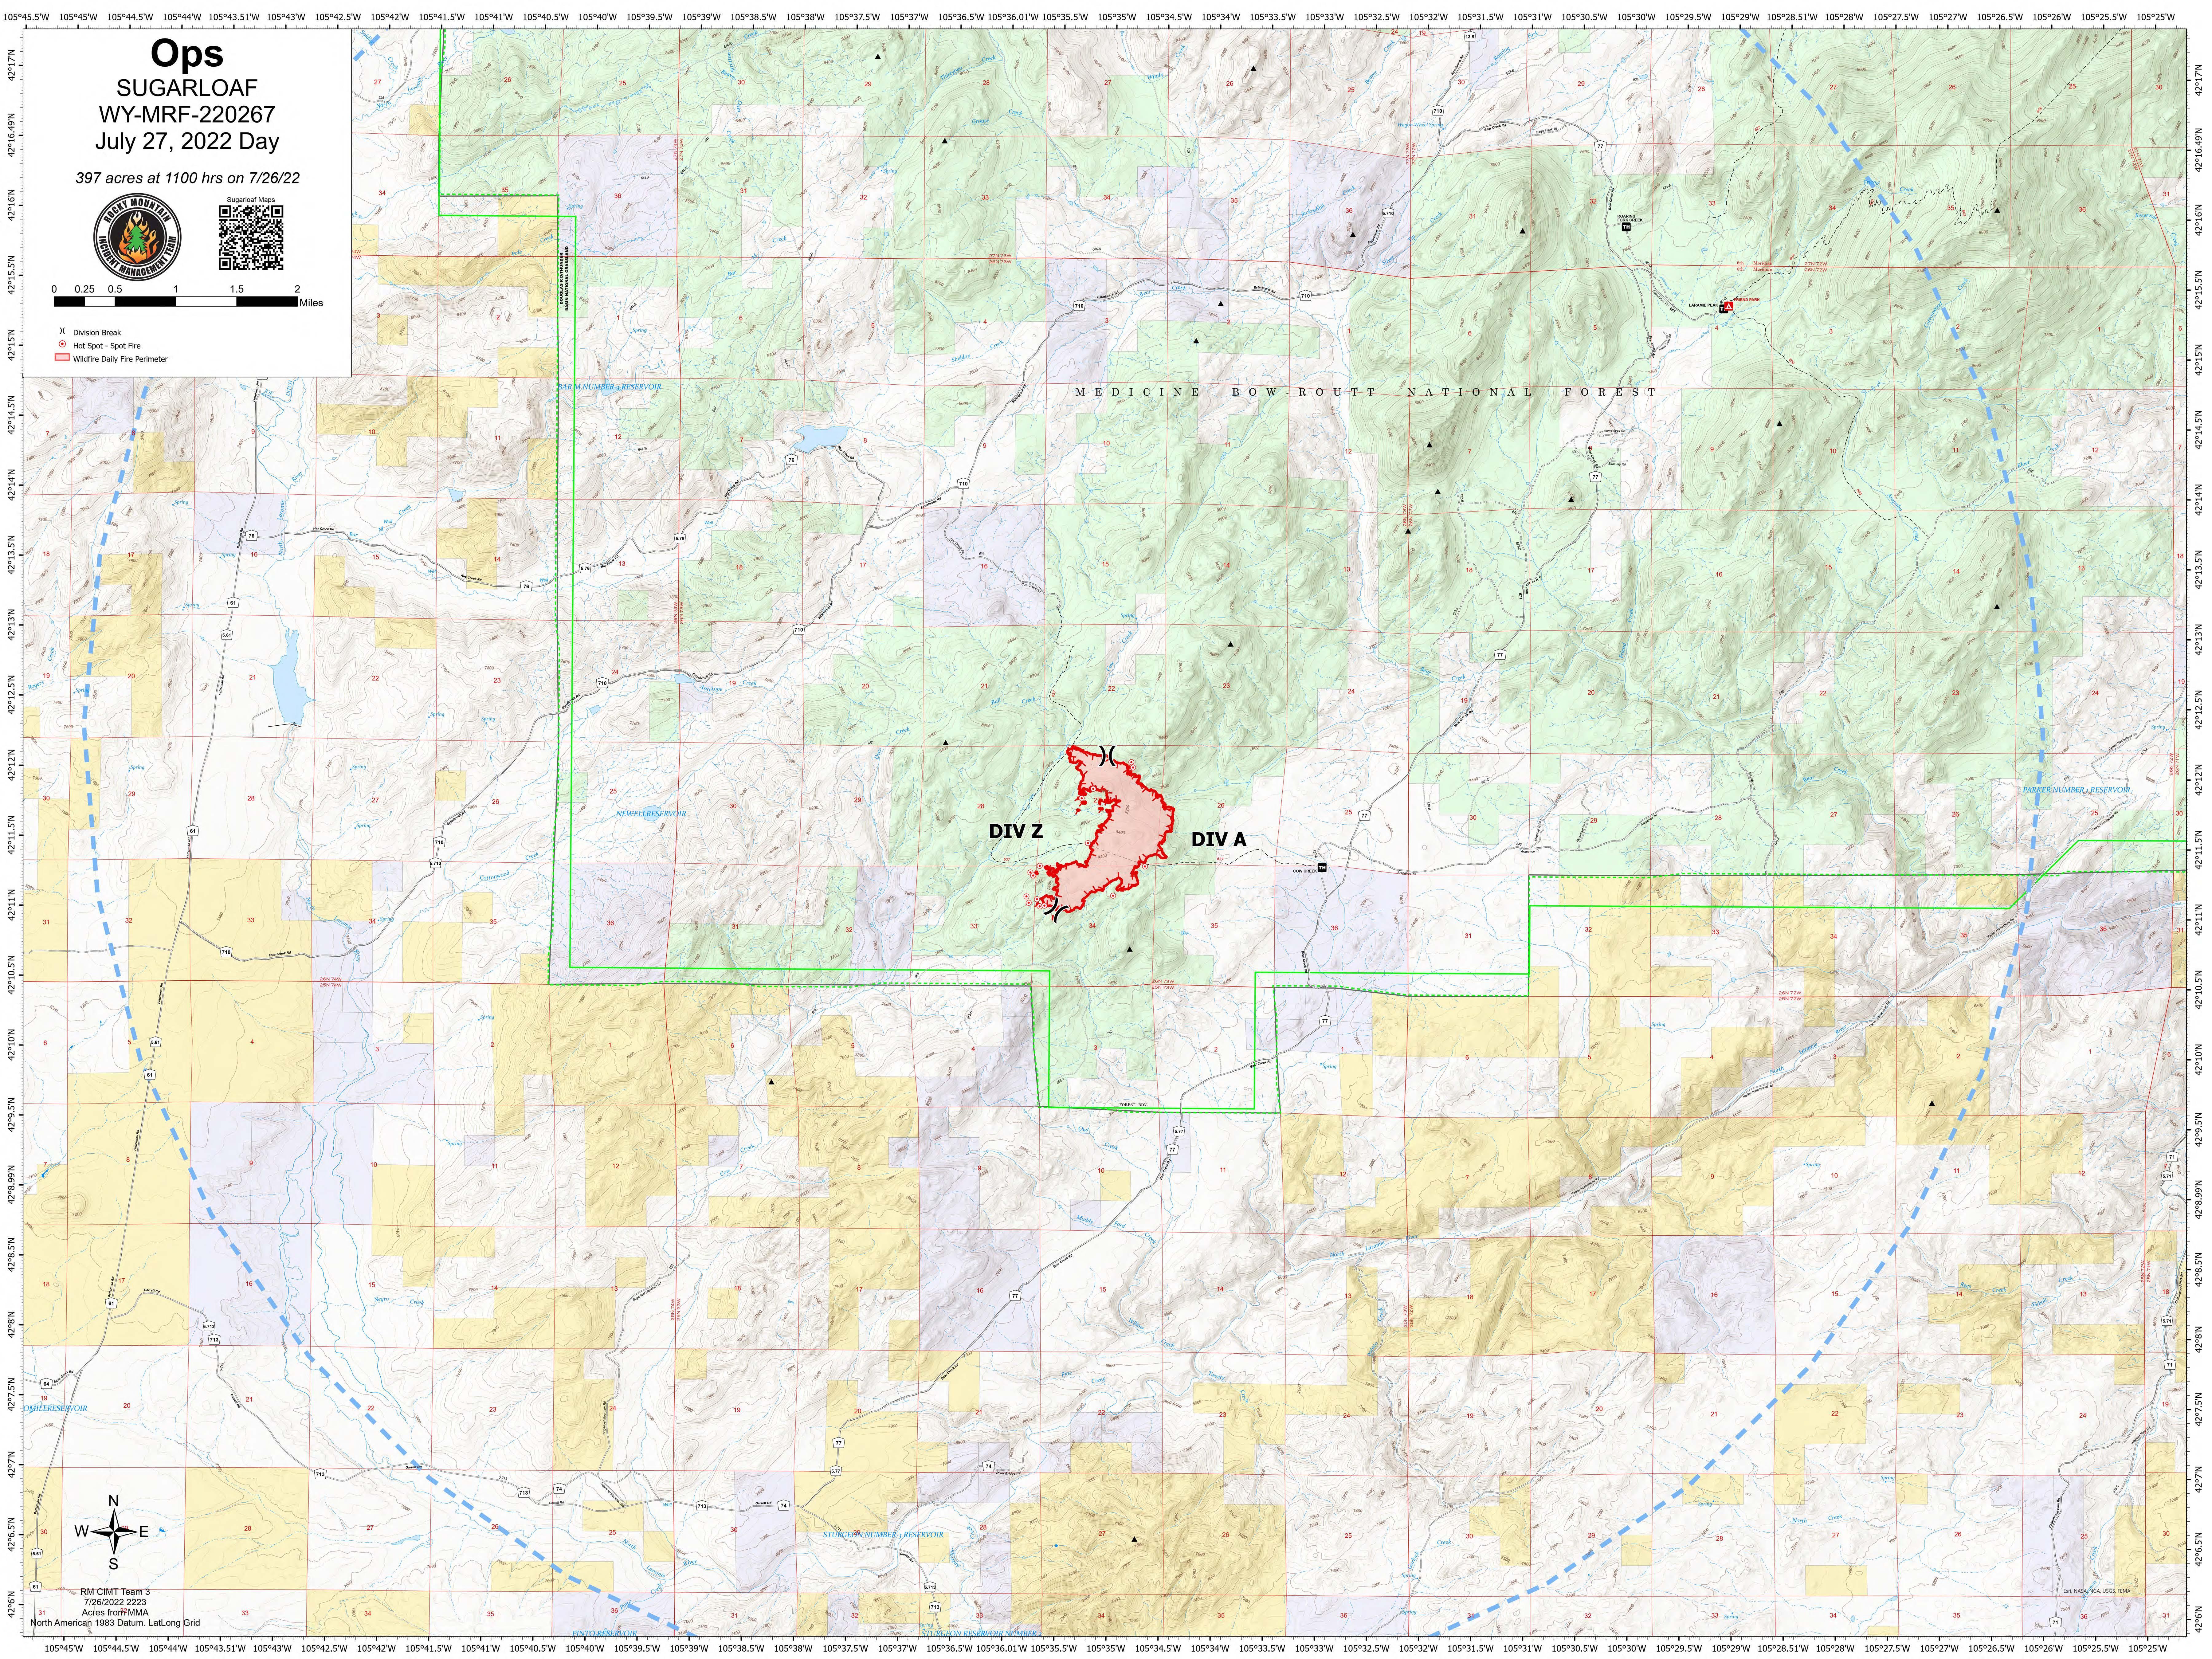 Sugarloaf Fire Operations Map for July 27